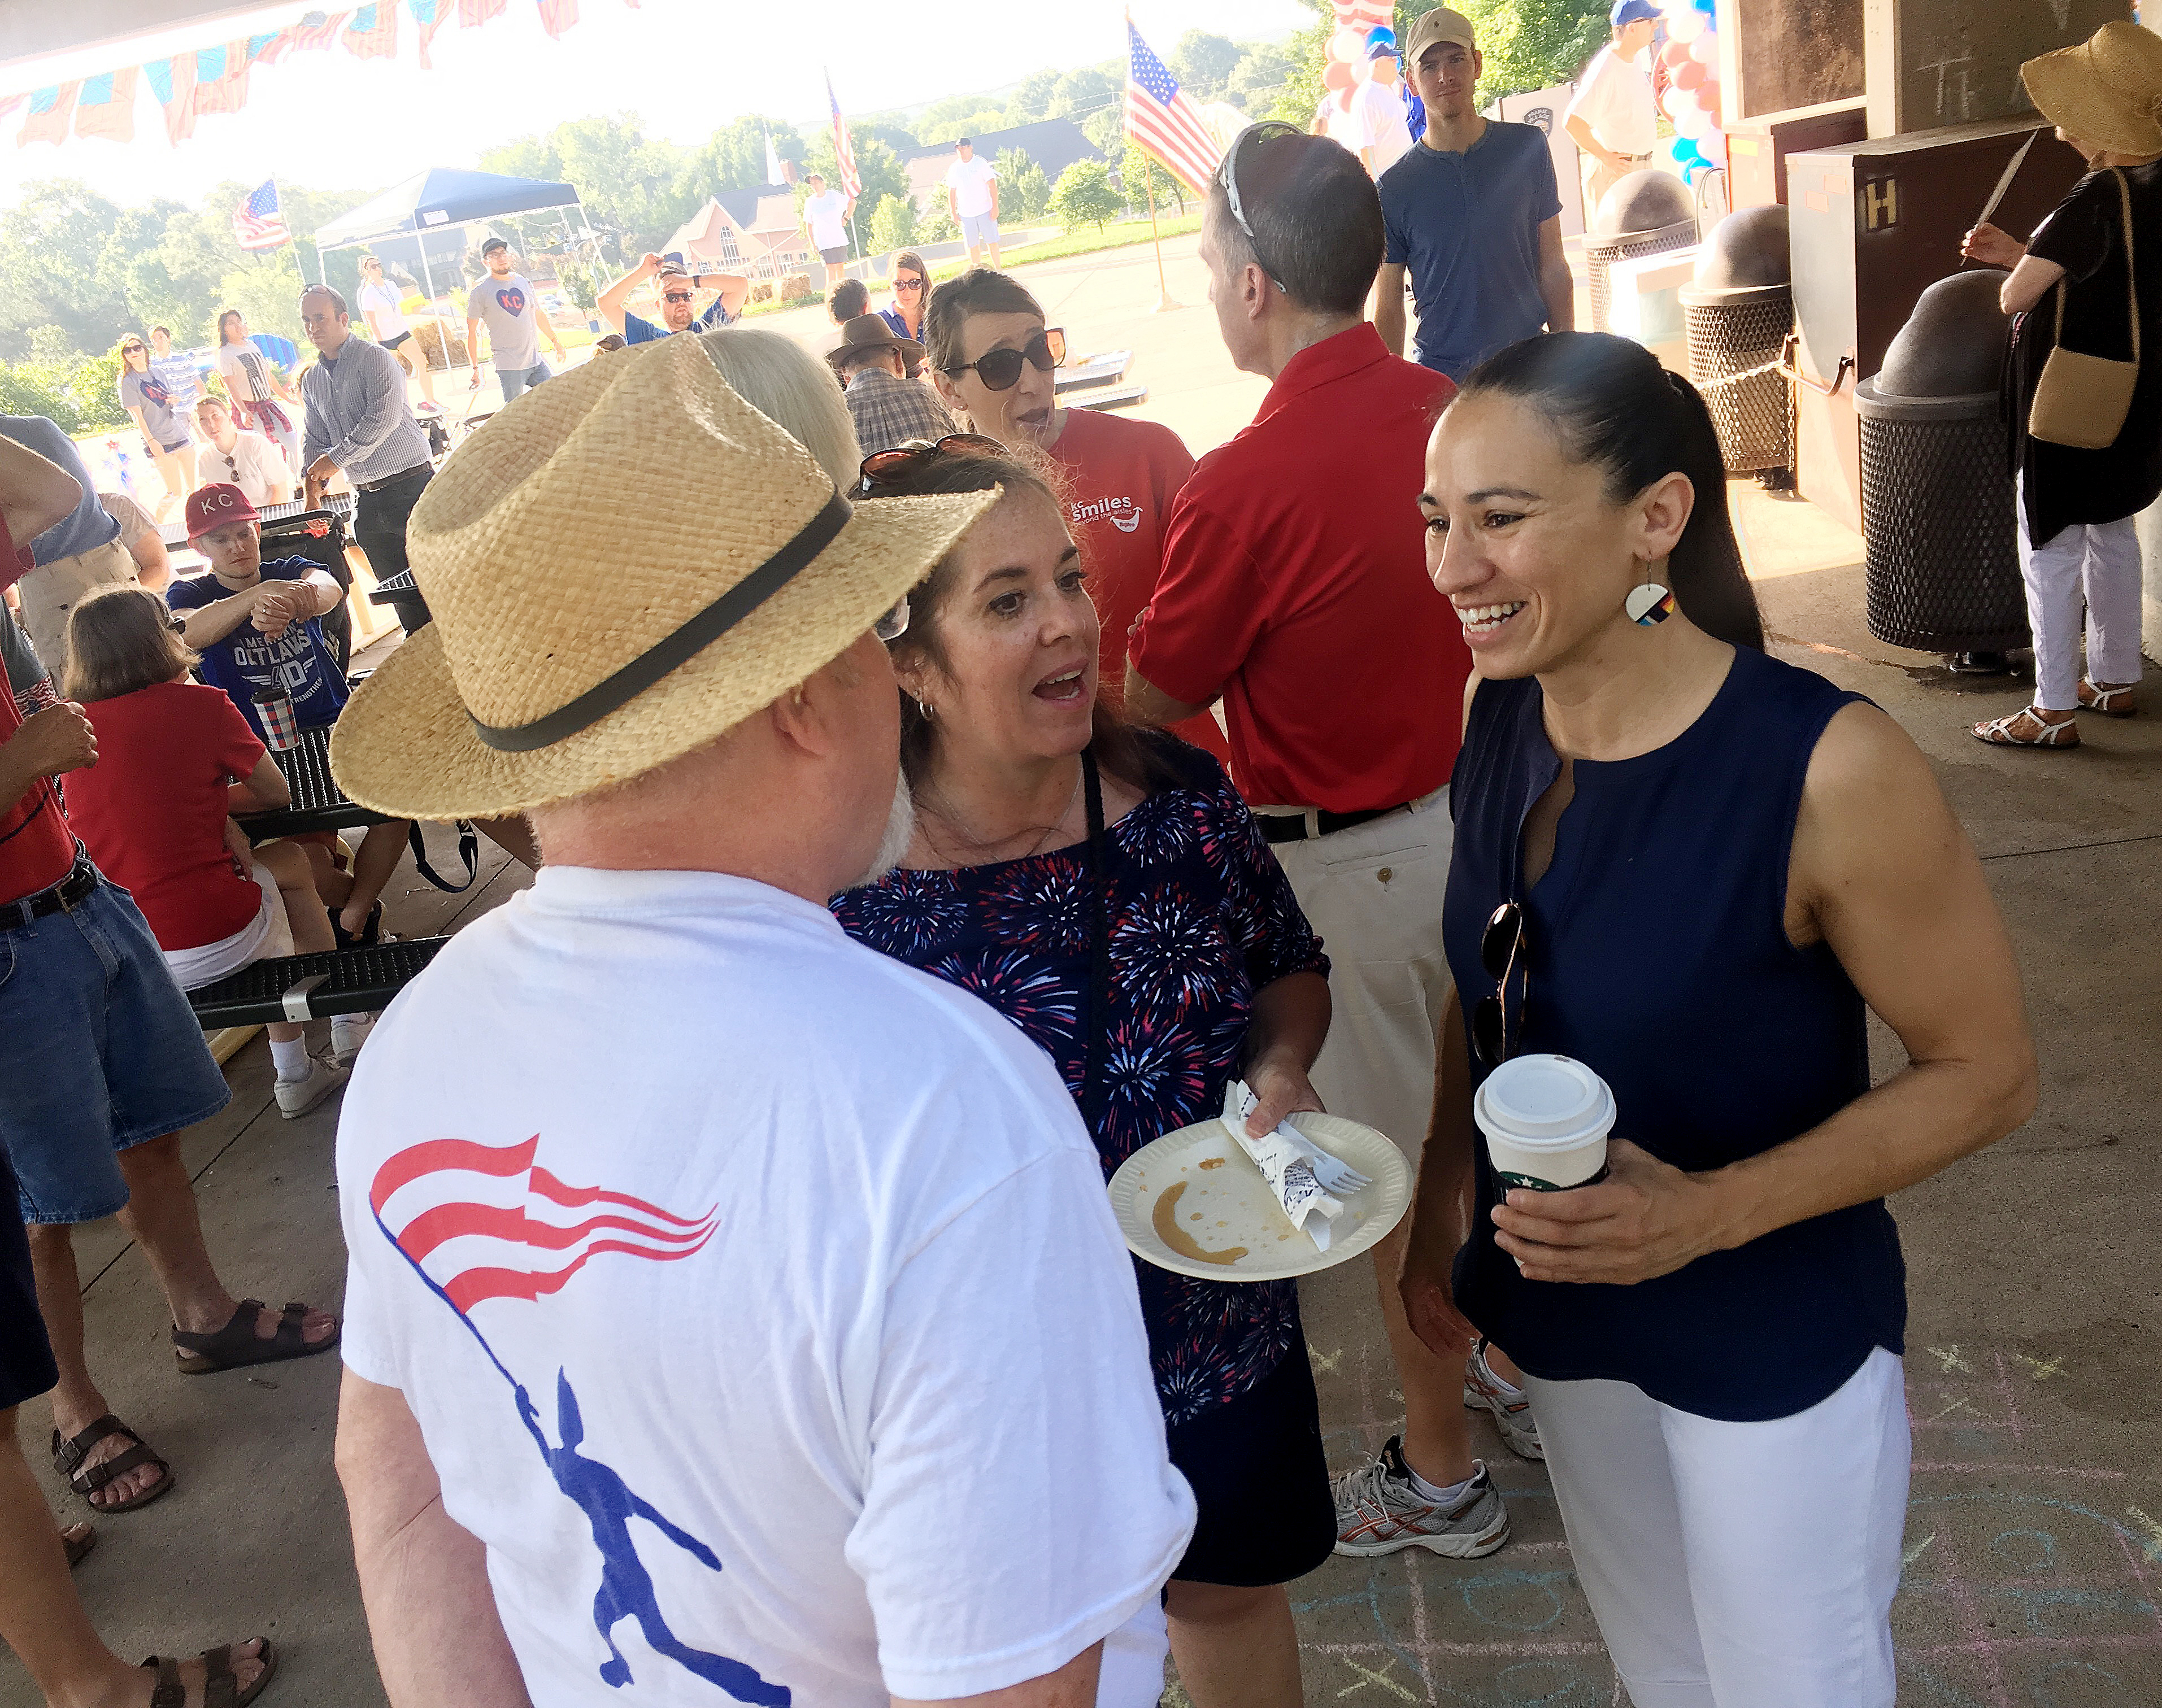 Sharice Davids, a Democrat running for Congress in Kansas, talks to supporters at a July 4 event in Prairie Village. (Photo by David Weigel/The Washington Post via Getty Images) (The Washington Post—The Washington Post/Getty Images)